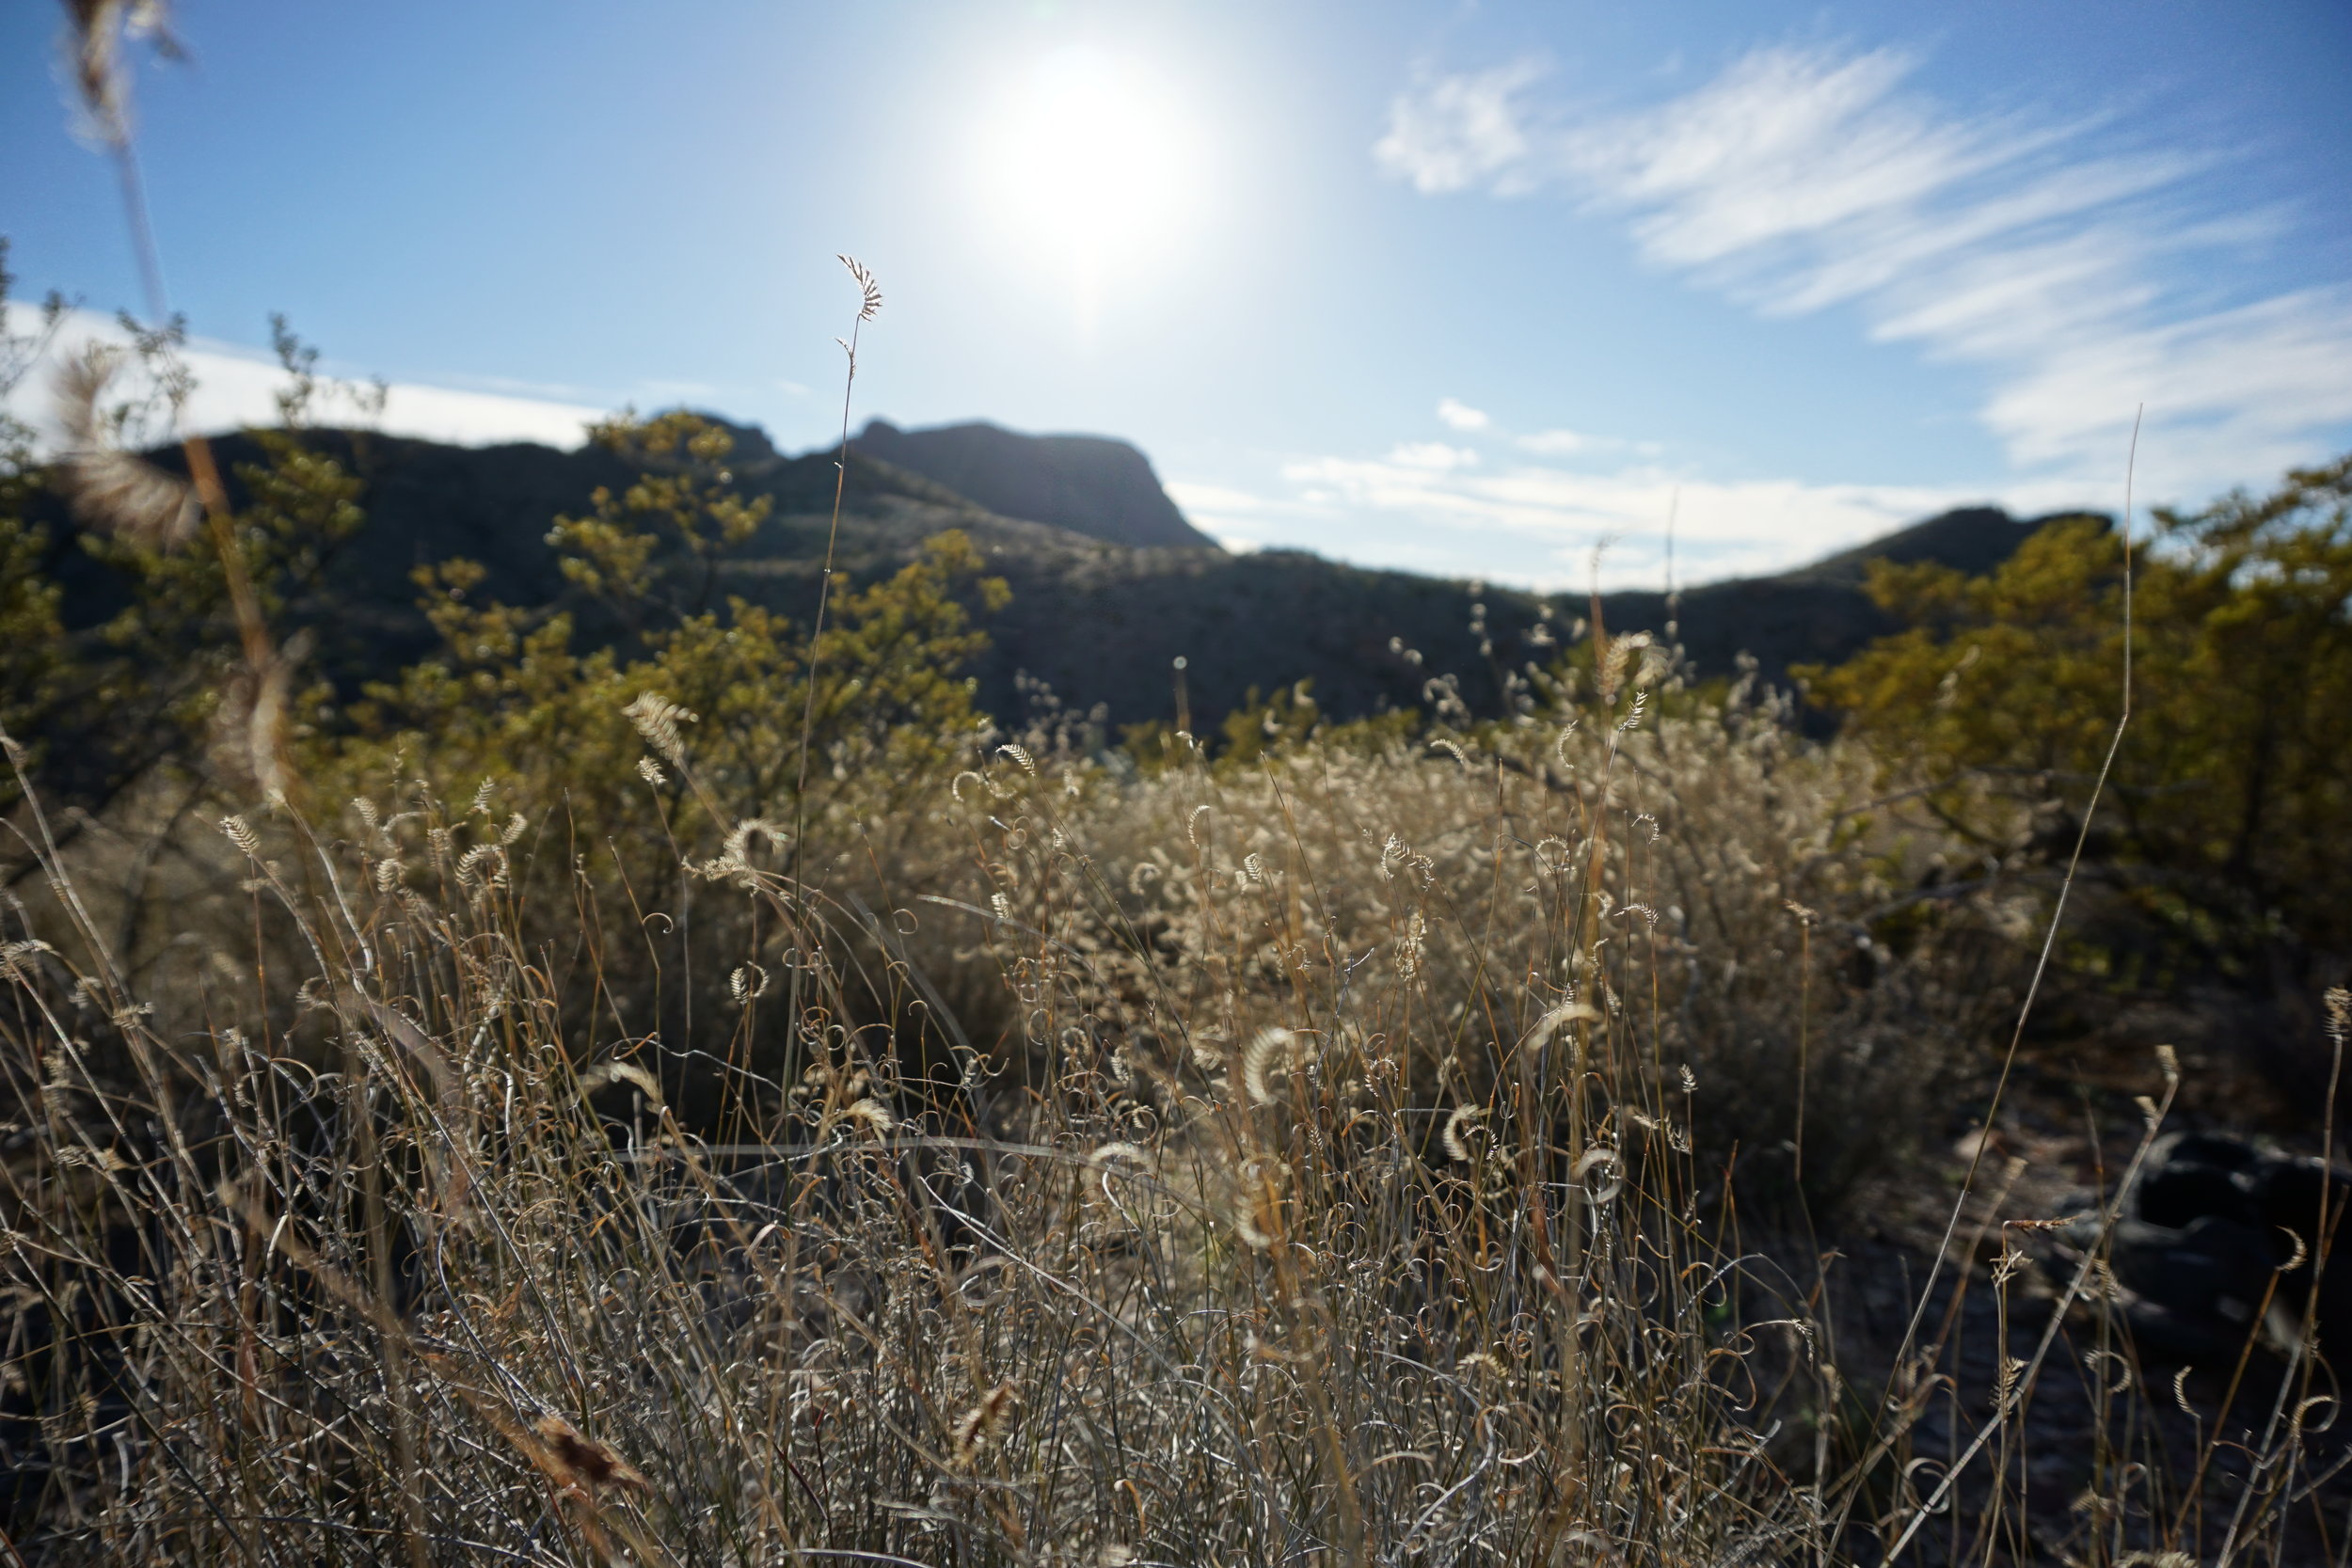 Mountain and grass scenery in Texas desert